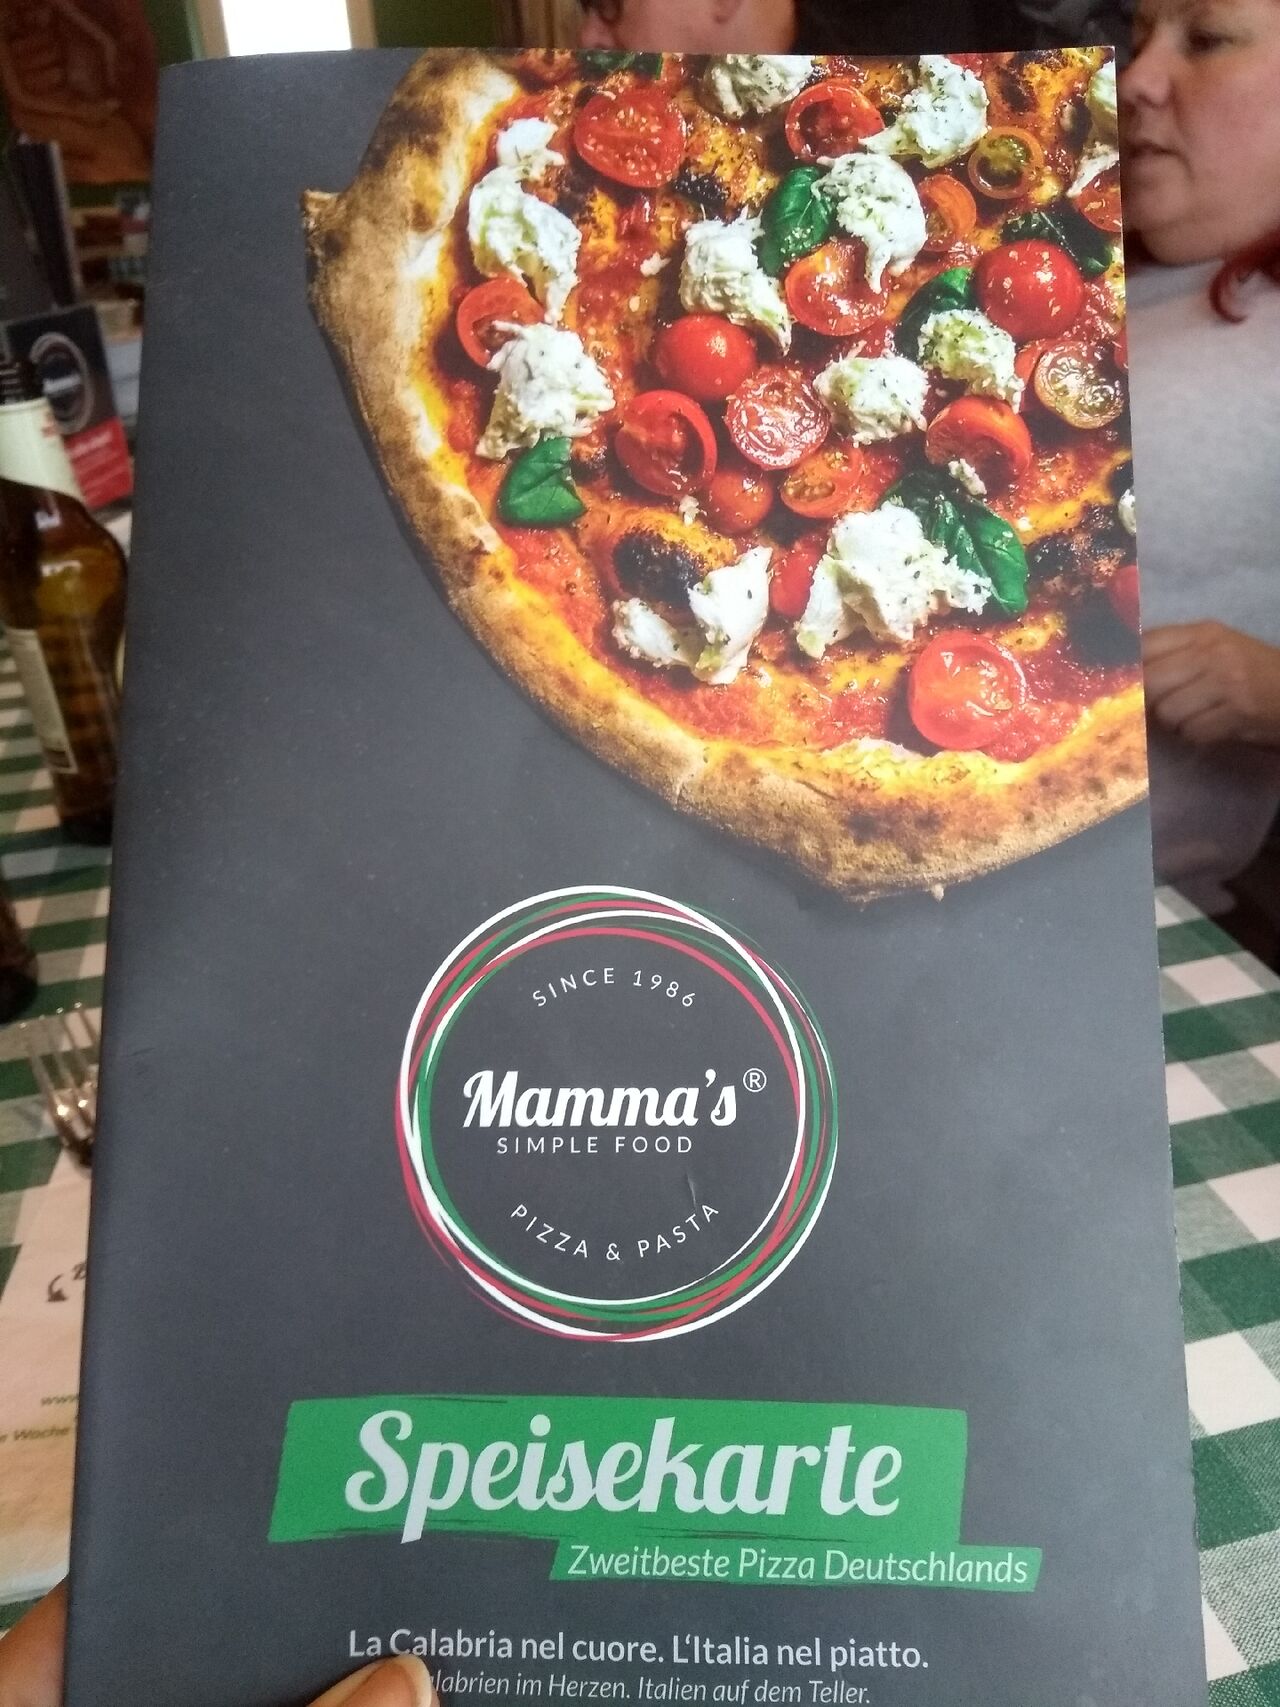 A photo of Mamma’s Simple Food, Bocholt